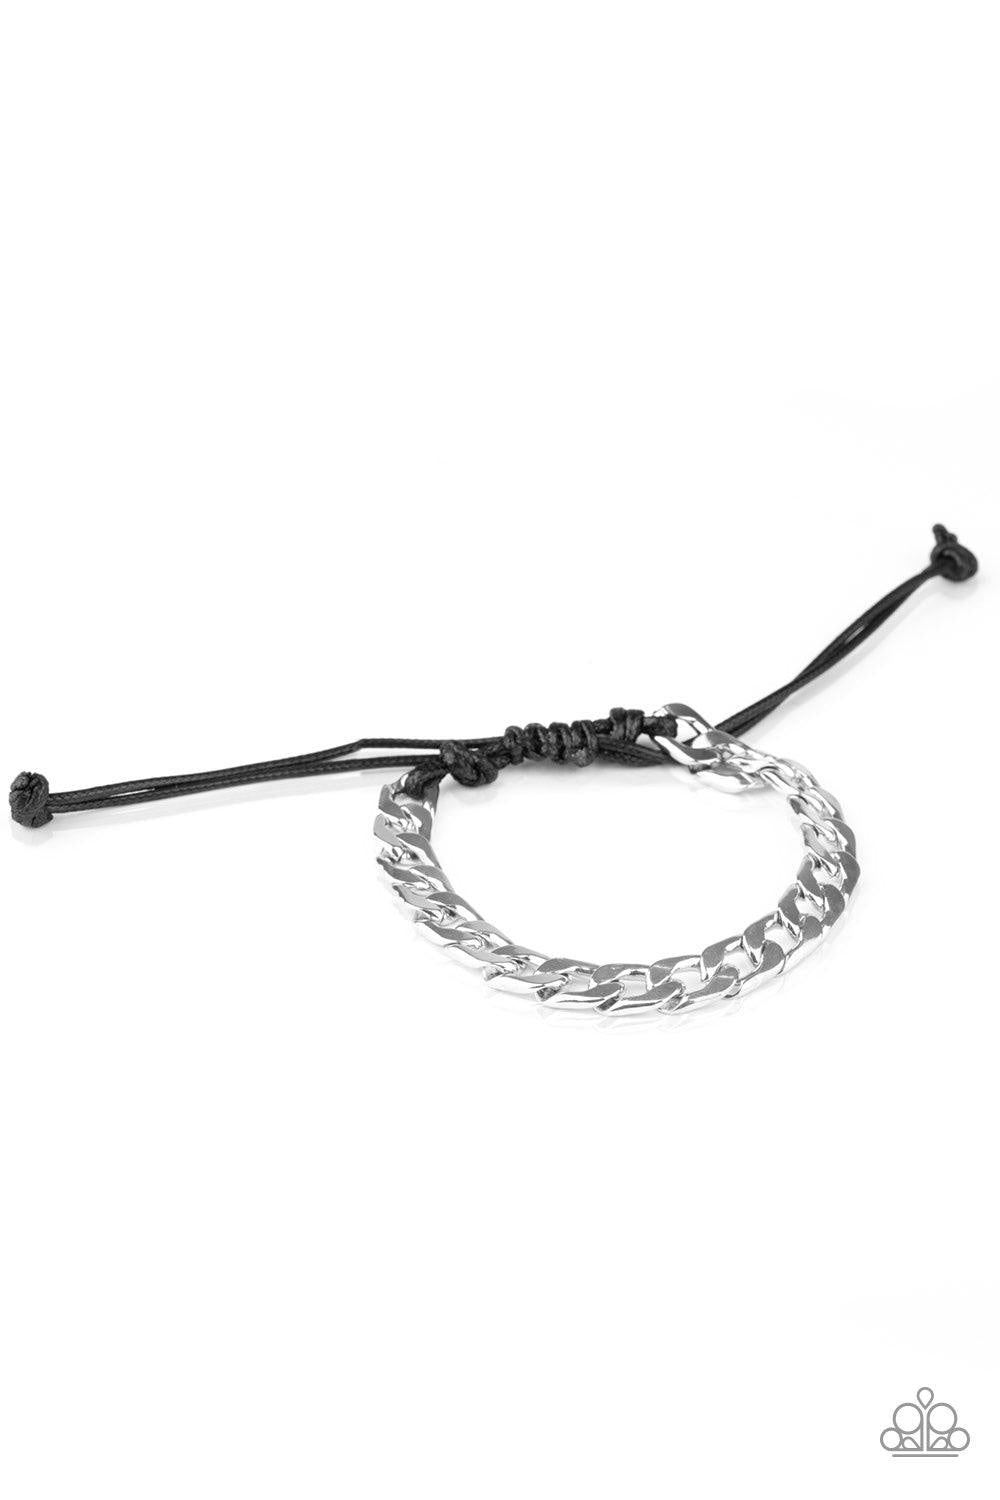 Paparazzi Accessories Score! - Silver Shiny black cording knots around the ends of a thick shiny silver curb chain that is wrapped across the top of the wrist for a versatile look. Features an adjustable sliding knot closure. Jewelry